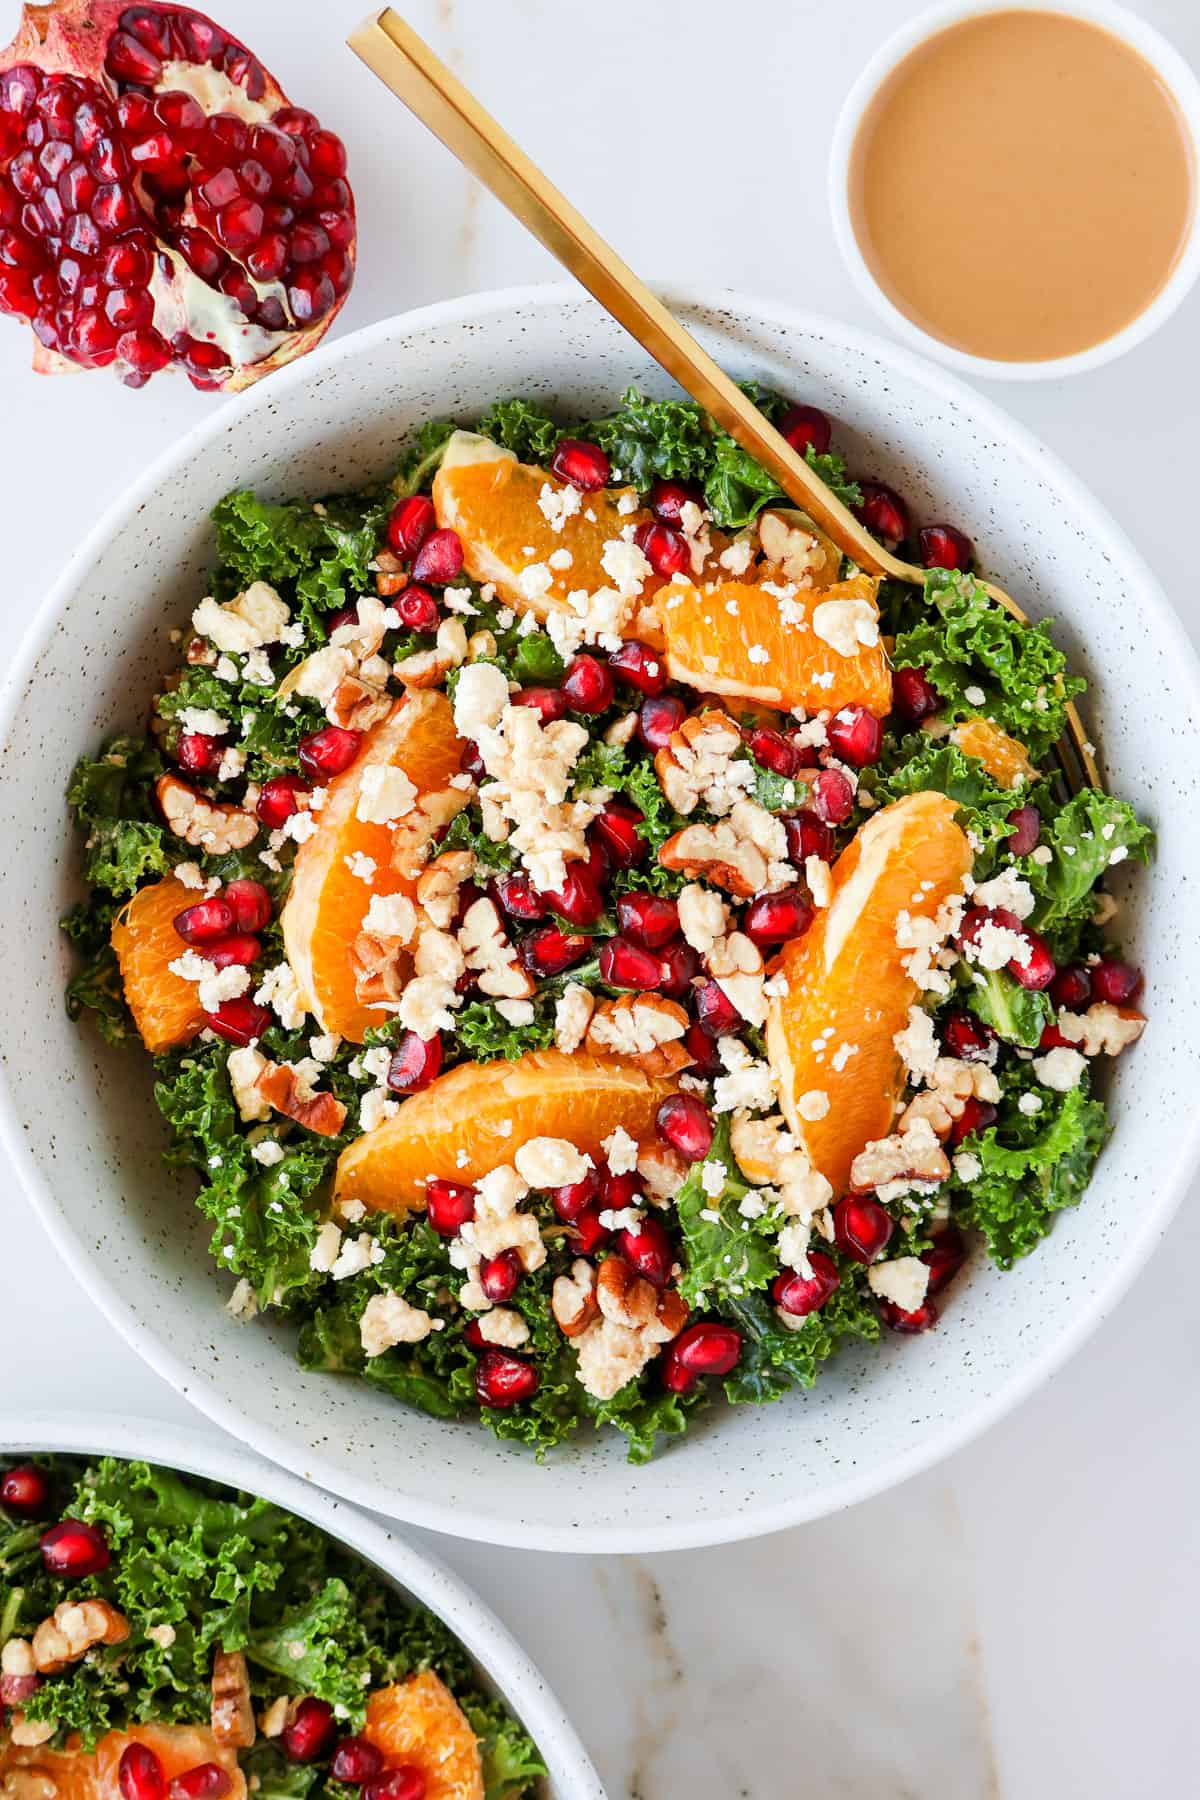 Kale and pomegranate salad in a bowl with a gold fork.